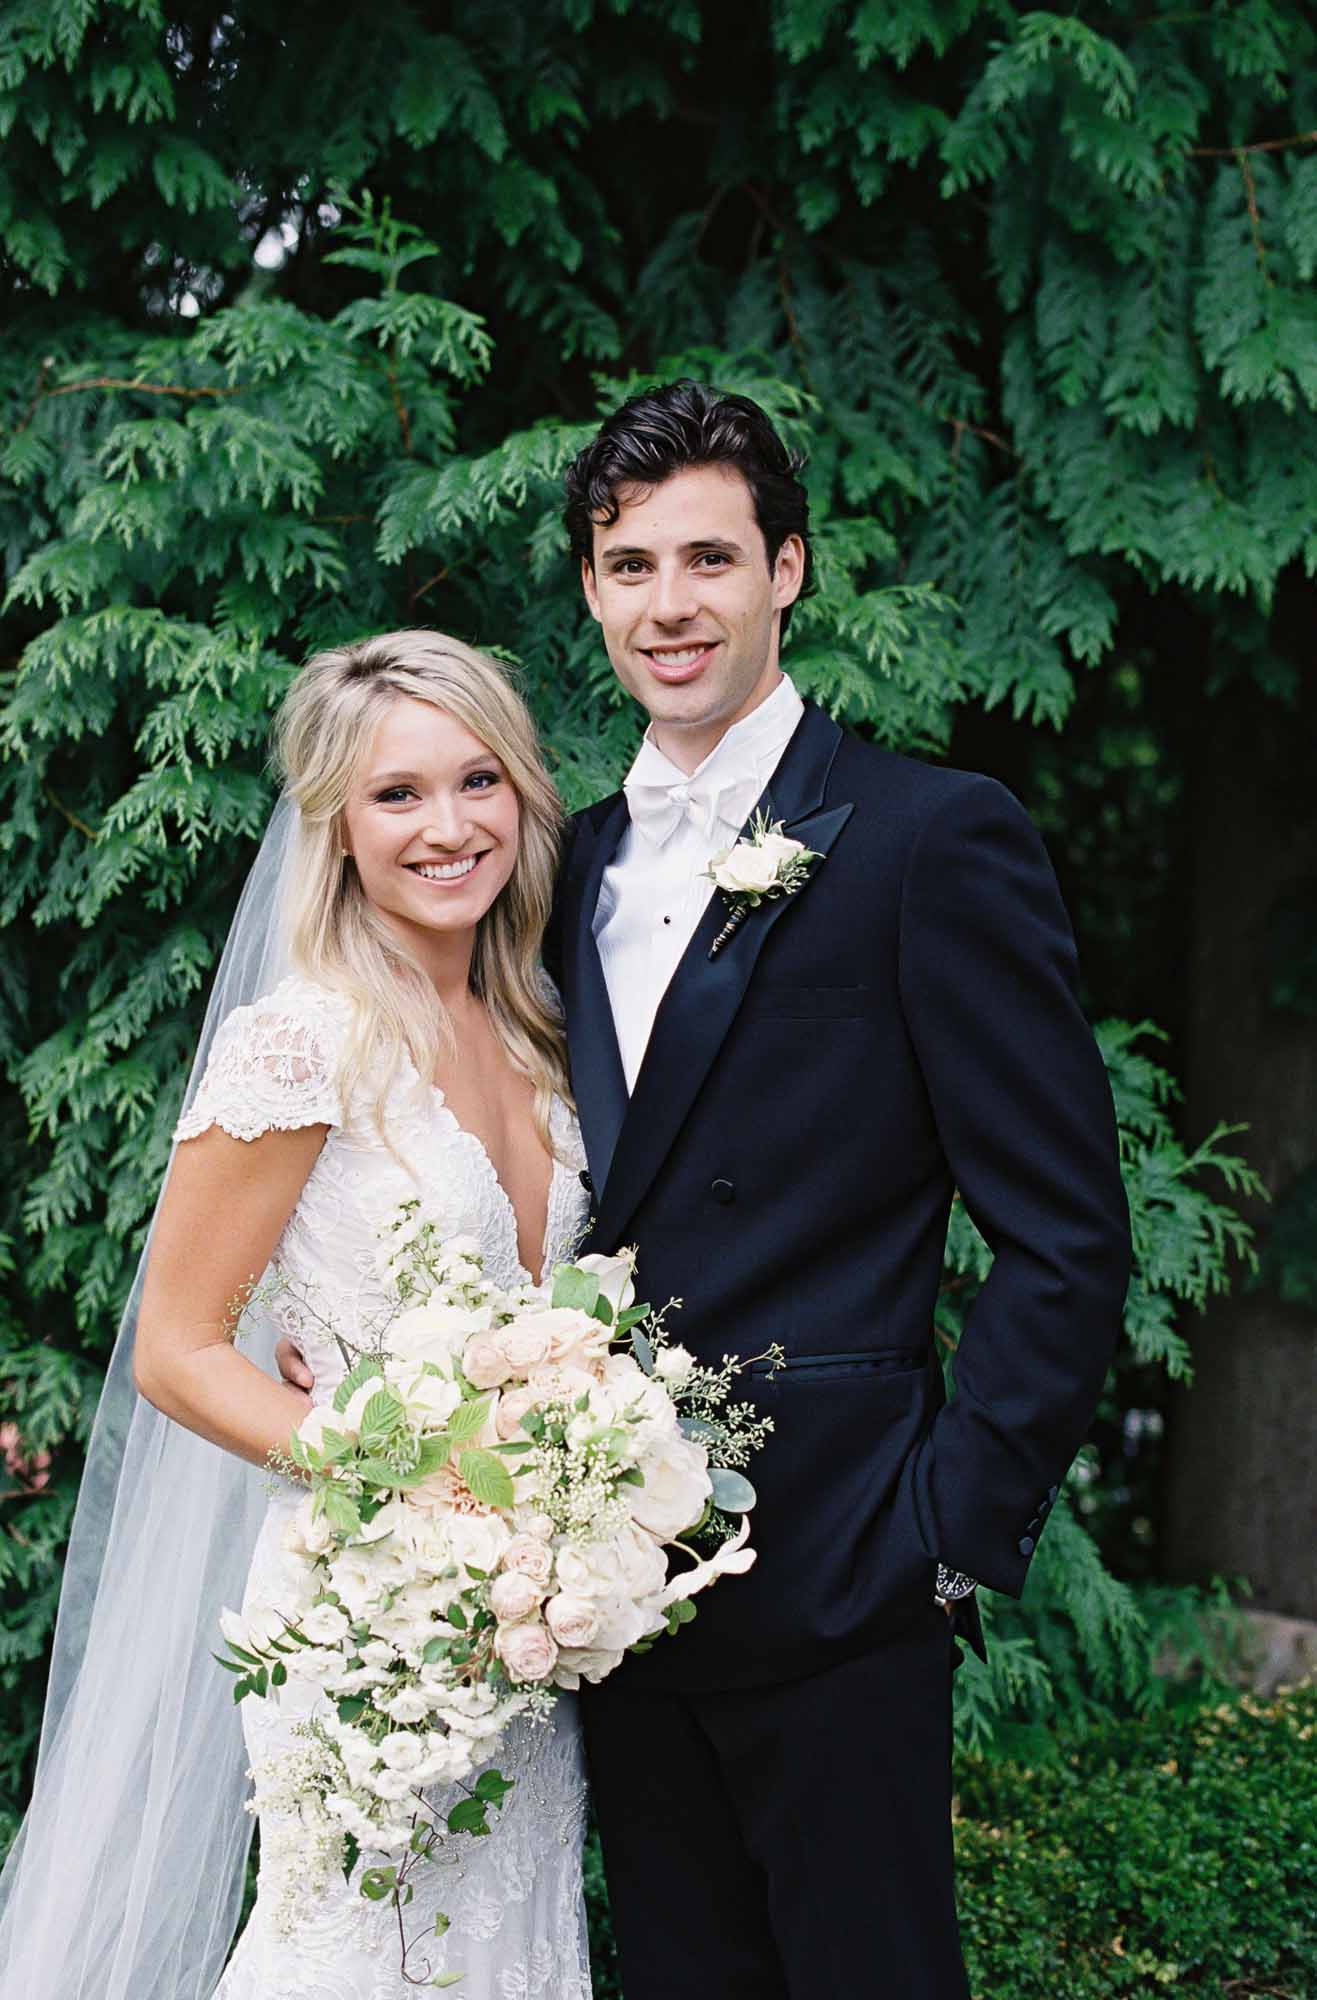 Bride and groom with lush garden style bouquet in blush and cream with greenery